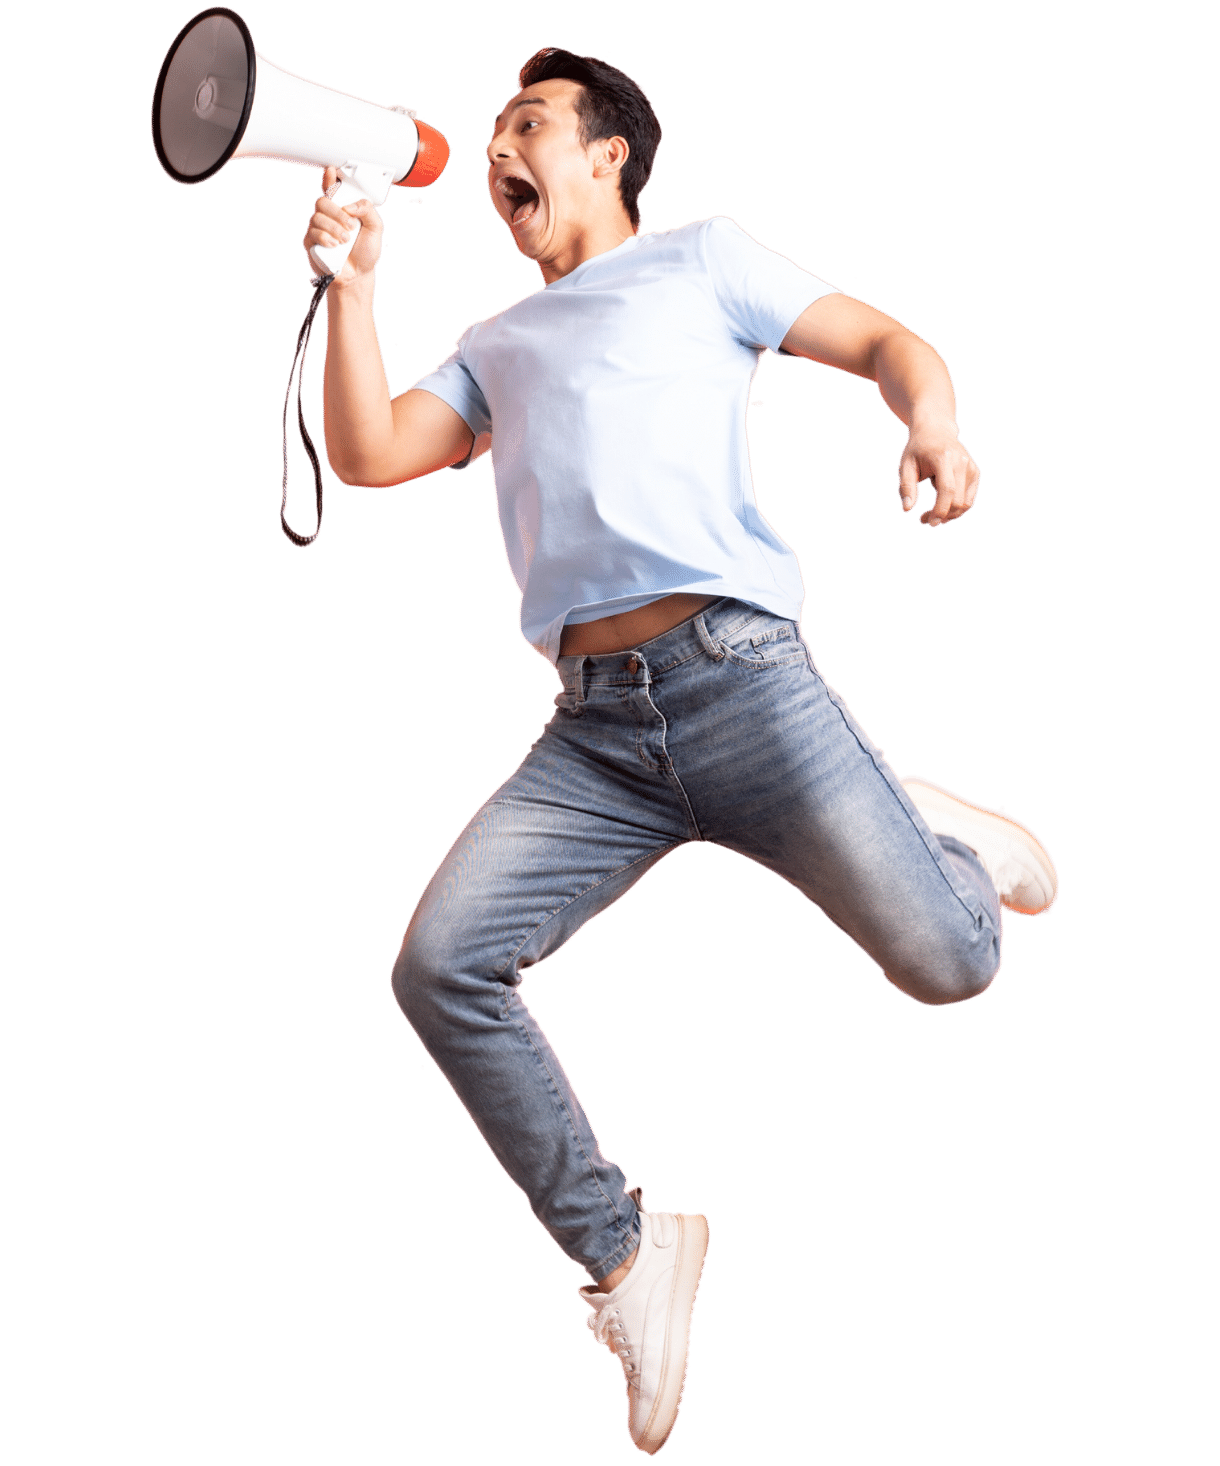 man in white shirt jumping with megaphone in hand